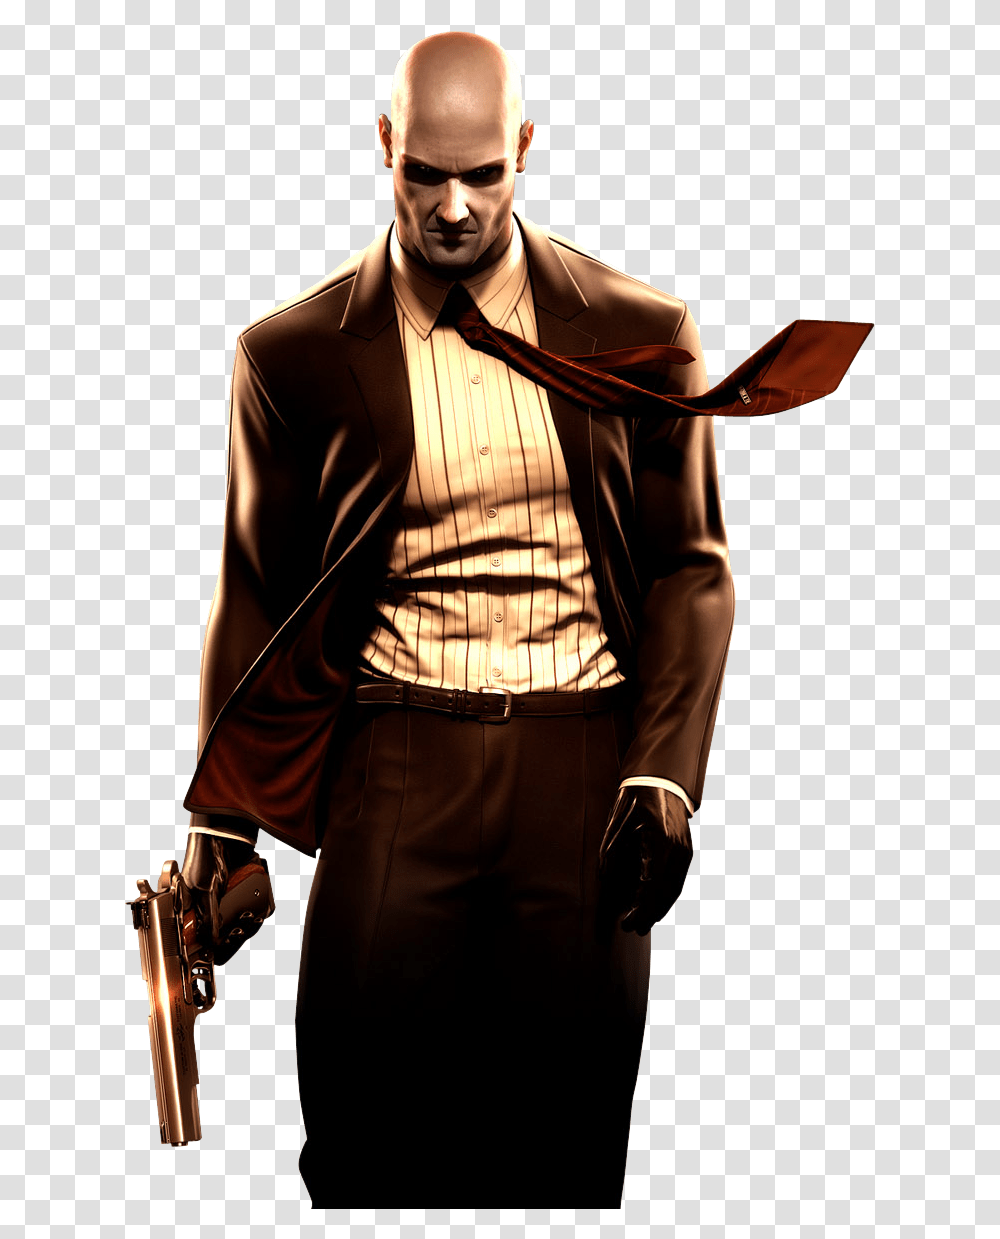 Agent 47 Hitman Hd Wallpaper For Mobile, Person, Suit, Overcoat Transparent Png